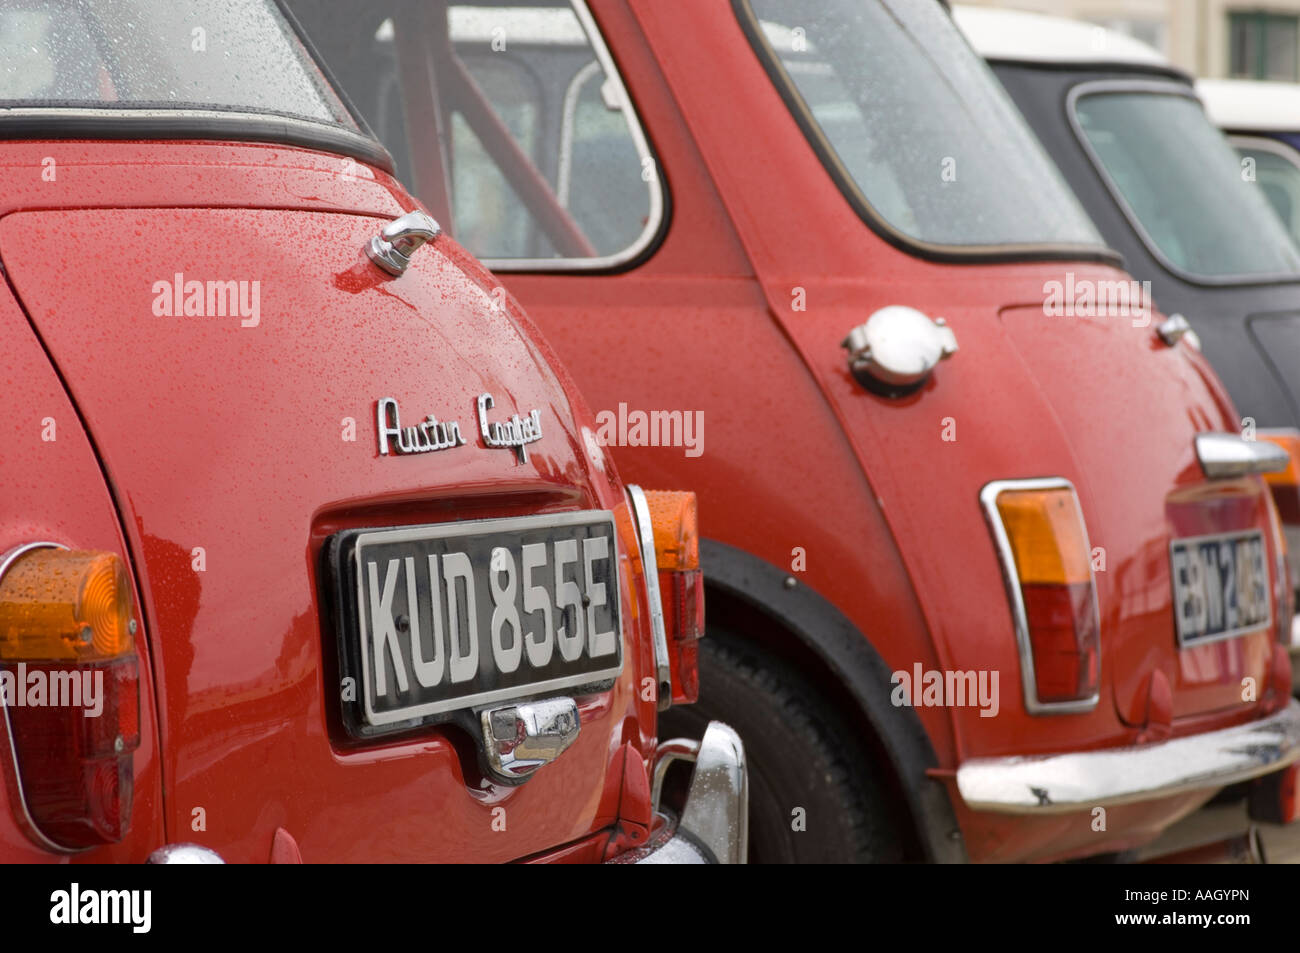 Row of red painted classic iconic english Austin Cooper cars Stock Photo